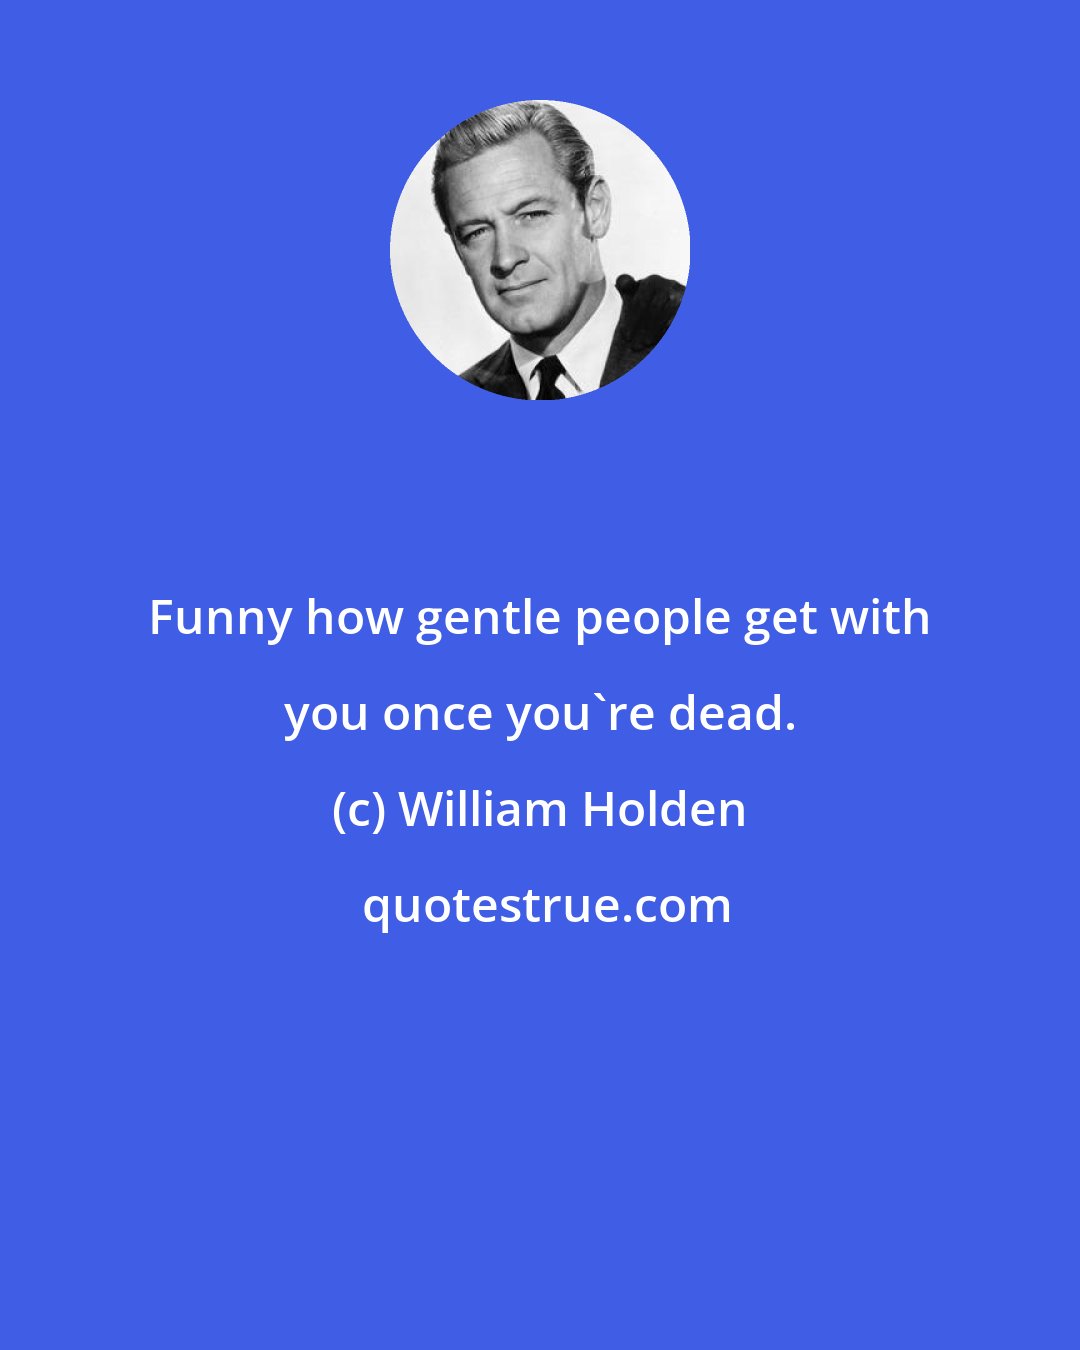 William Holden: Funny how gentle people get with you once you're dead.